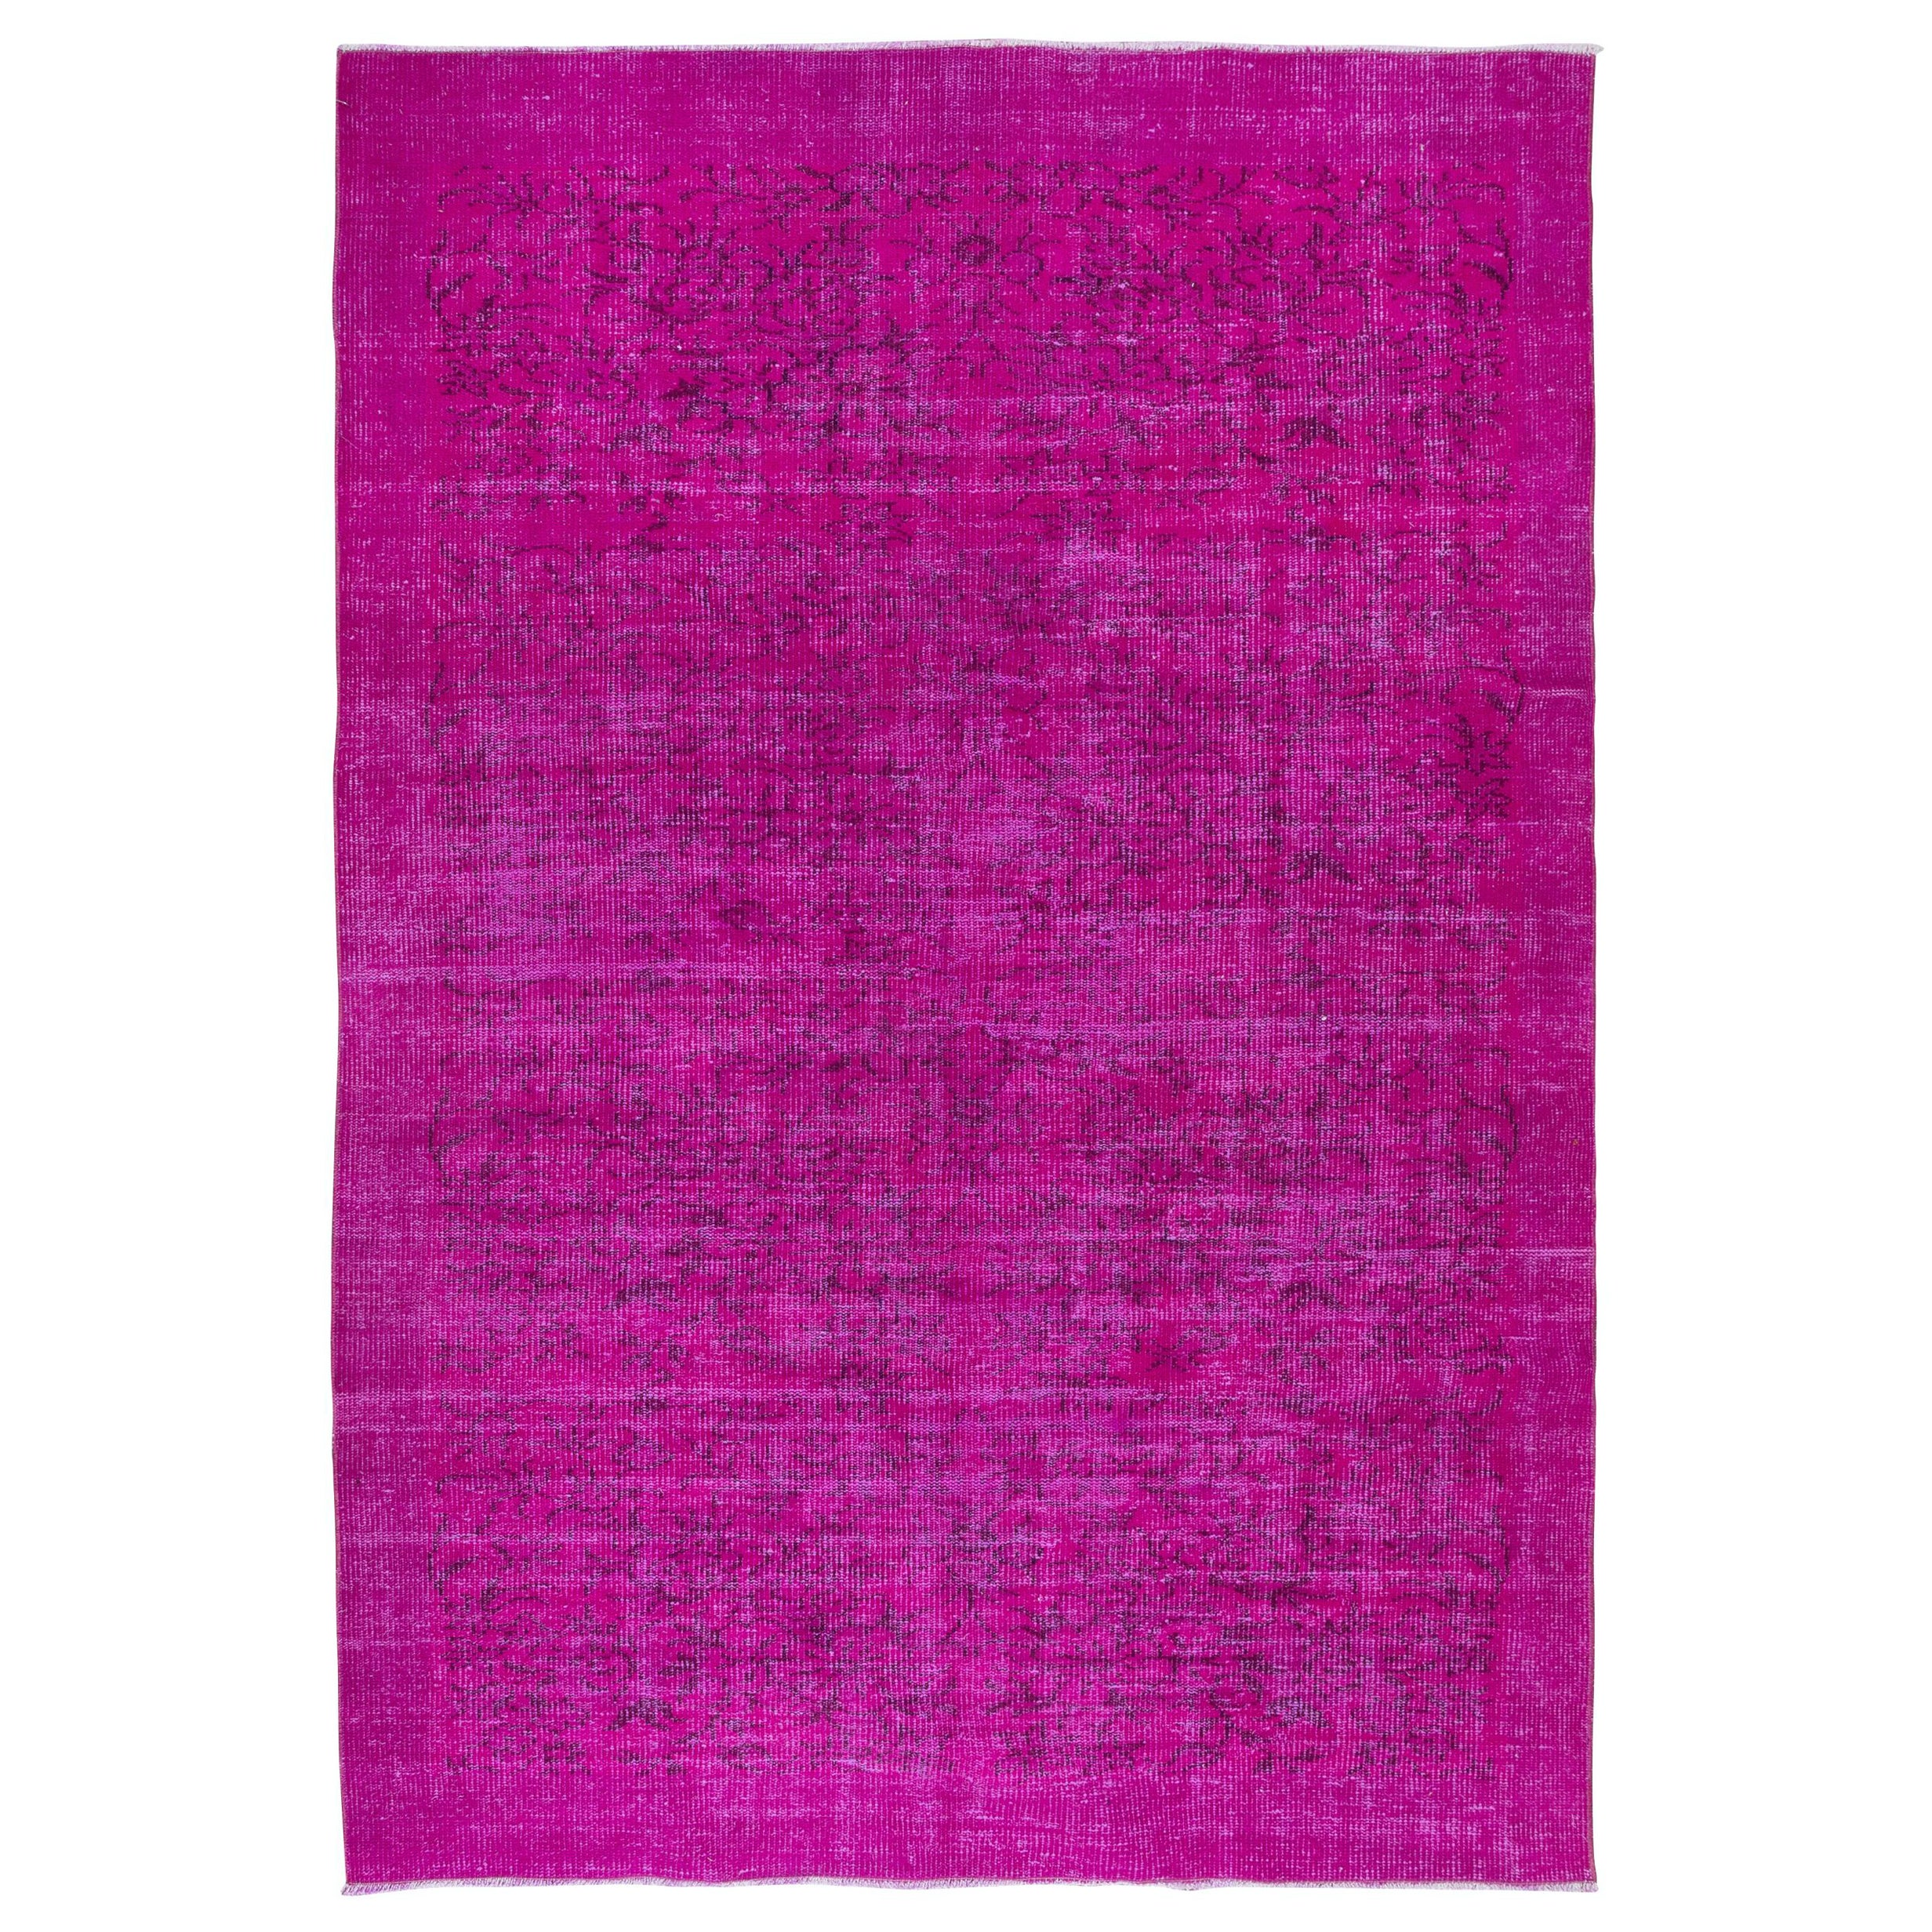 5.8x8.6 Ft Handmade Turkish Floral Rug with Hot Pink Background and Solid Border